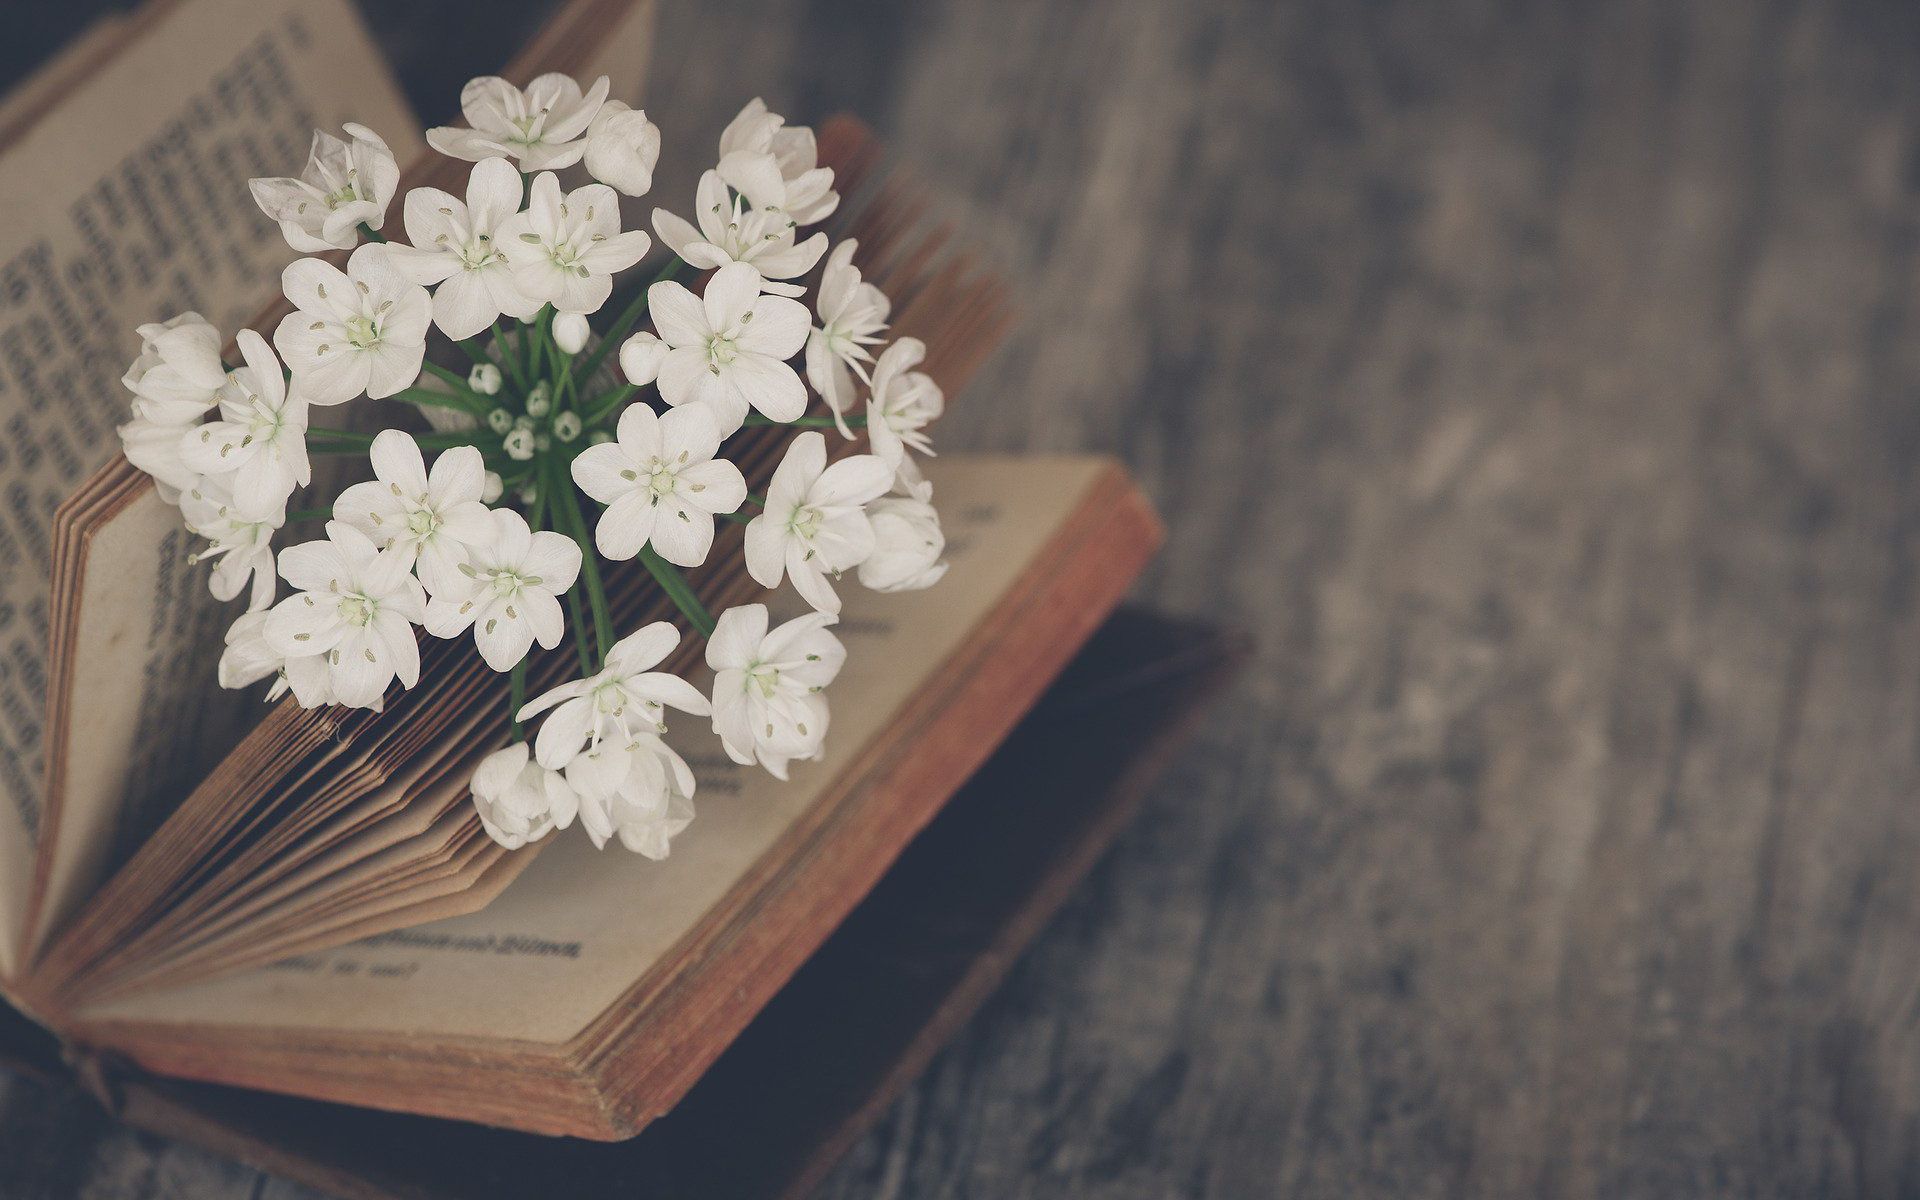 Download wallpaper spring flowers, old book, mood, blur, flowers in the book for desktop with resolution 1920x1200. High Quality HD picture wallpaper